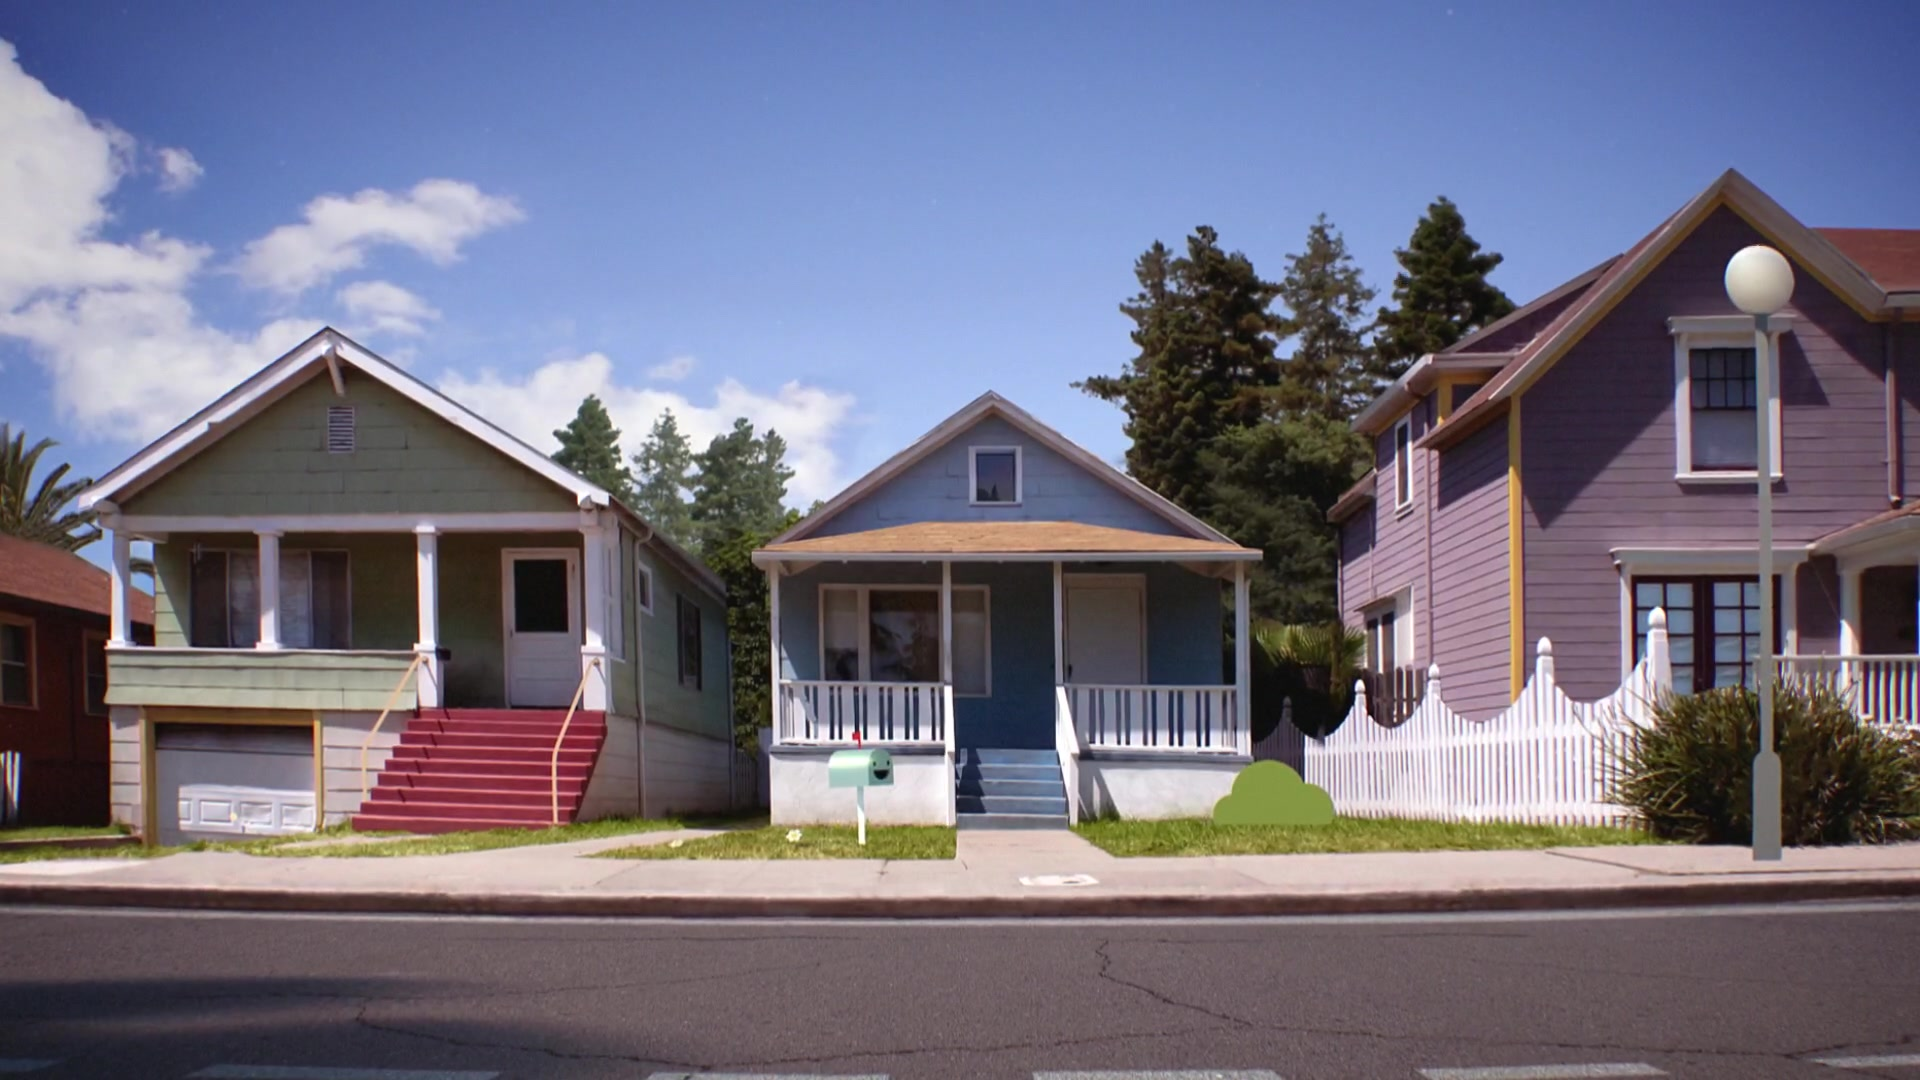 I went from Spain to the real Gumball House. It was a 15-hour trip